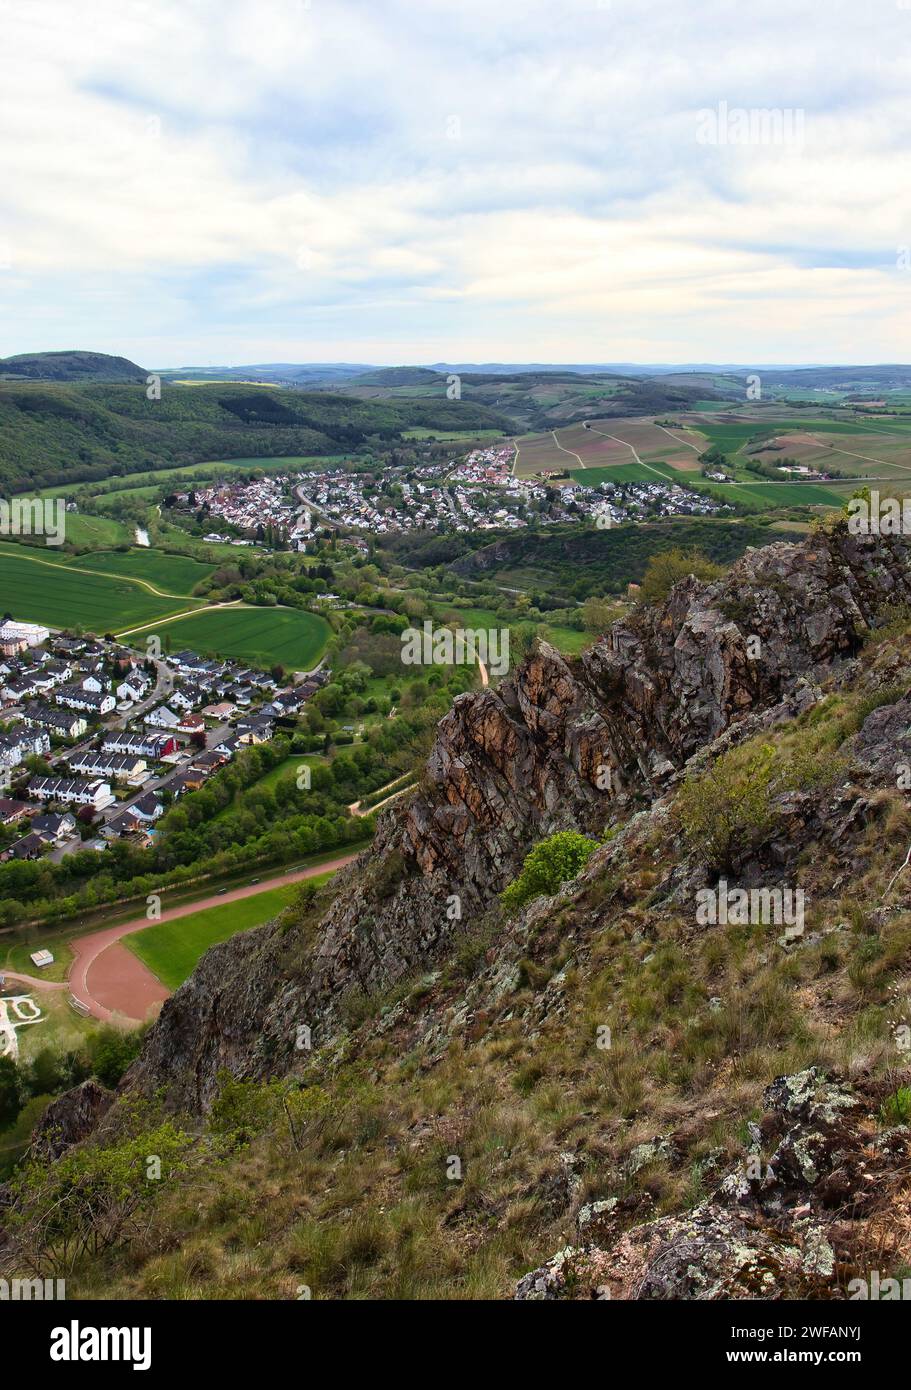 Bad Munster, Germany - May 9, 2021: Jagged edge of Rotenfels cliff overlooking German towns surrounded by green fields. Stock Photo